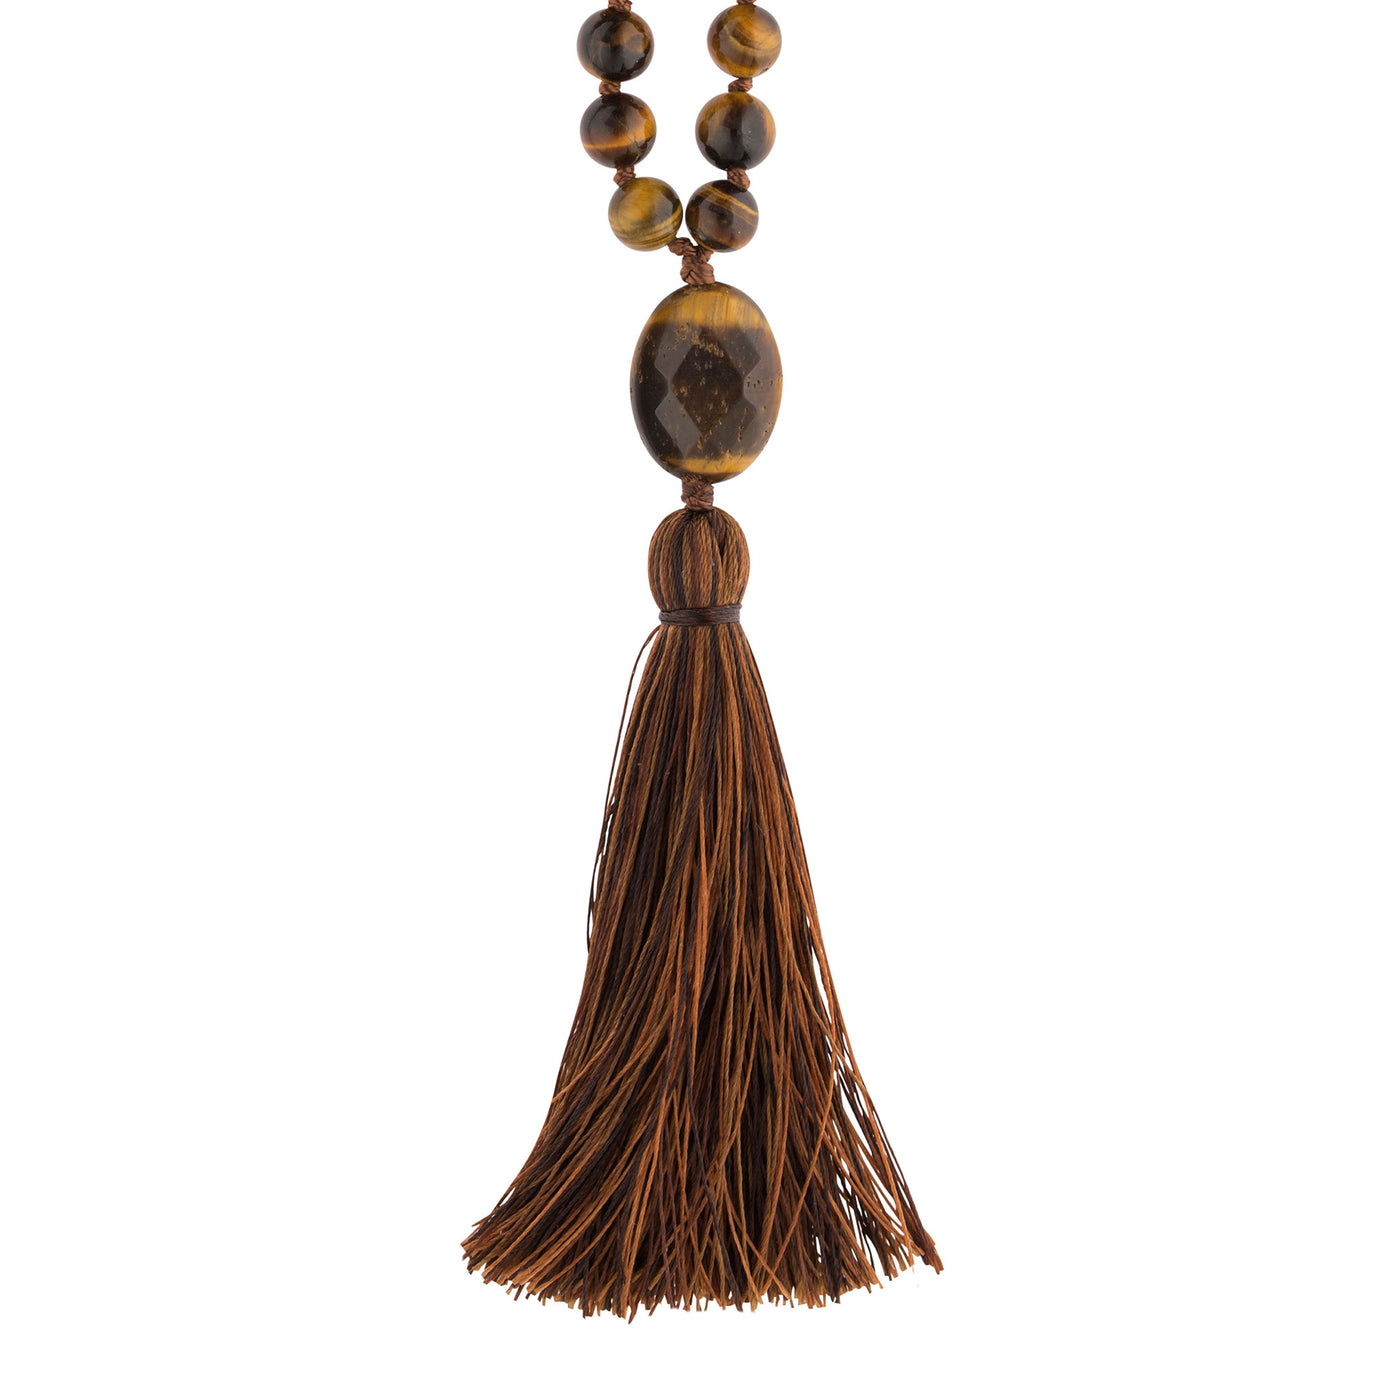 COURAGE: Tiger's Eye Calming Stone 108 Bead Hand-knotted Mala Necklace (6mm)